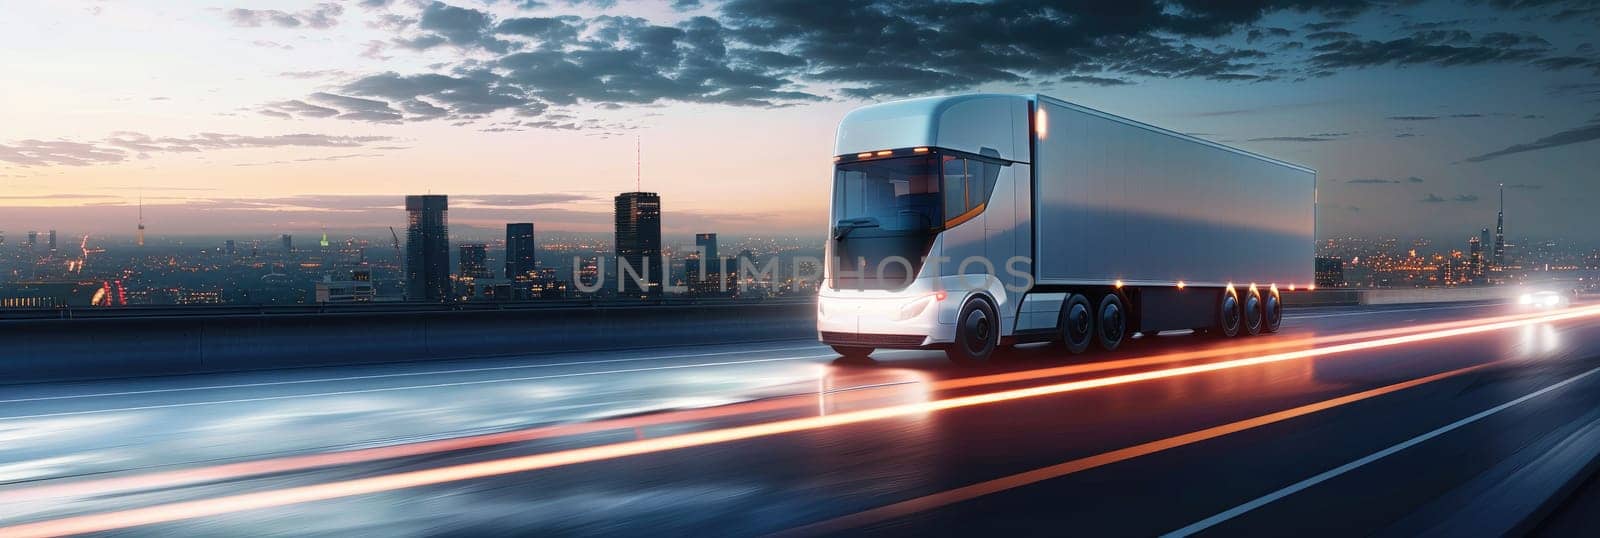 A large semi truck is driving down a highway with a city in the background by AI generated image.